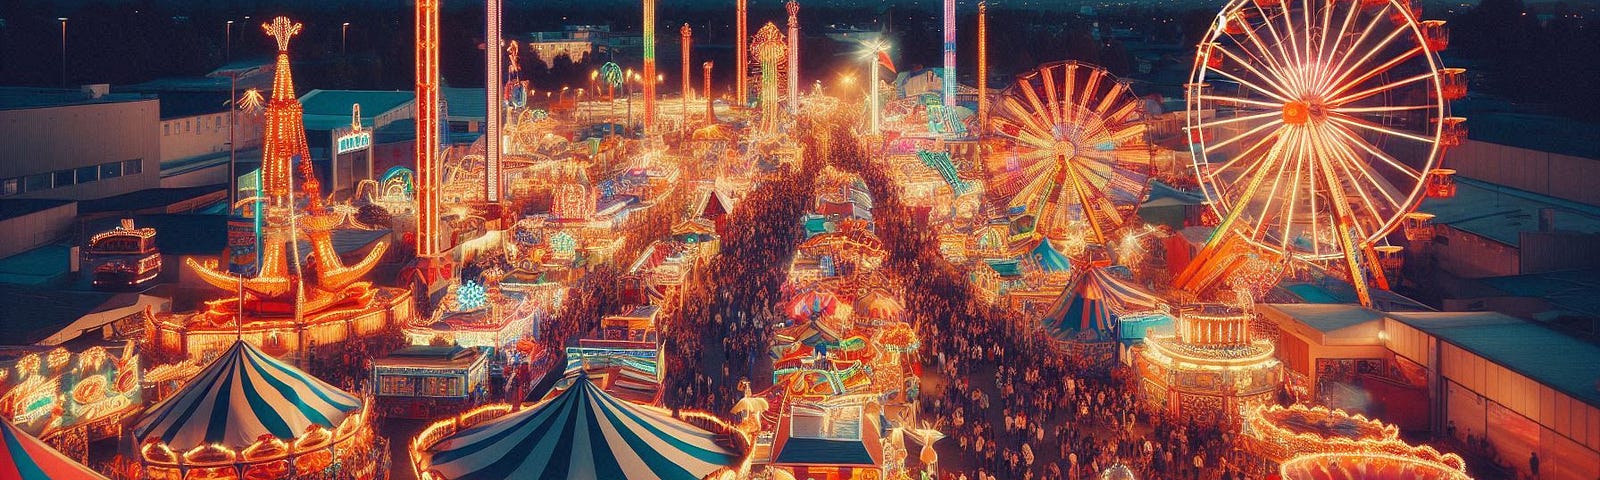 Visiting a fairground, with an abundance of rides and stands in view at night with lights on in photo style picture.